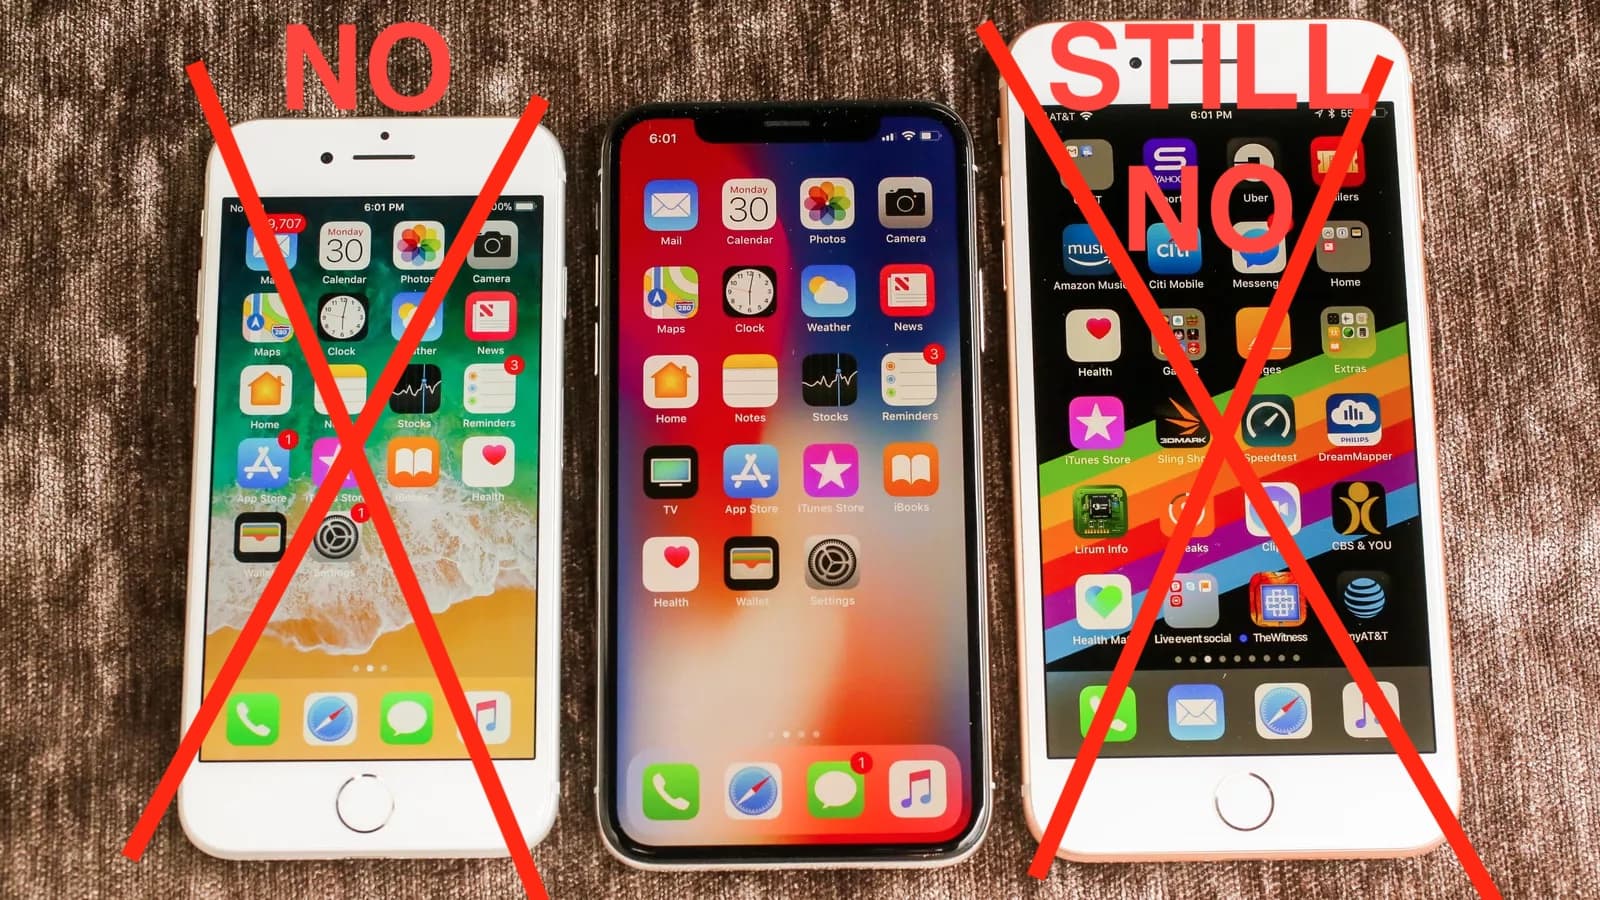 Almost no bezels in the new iPhone